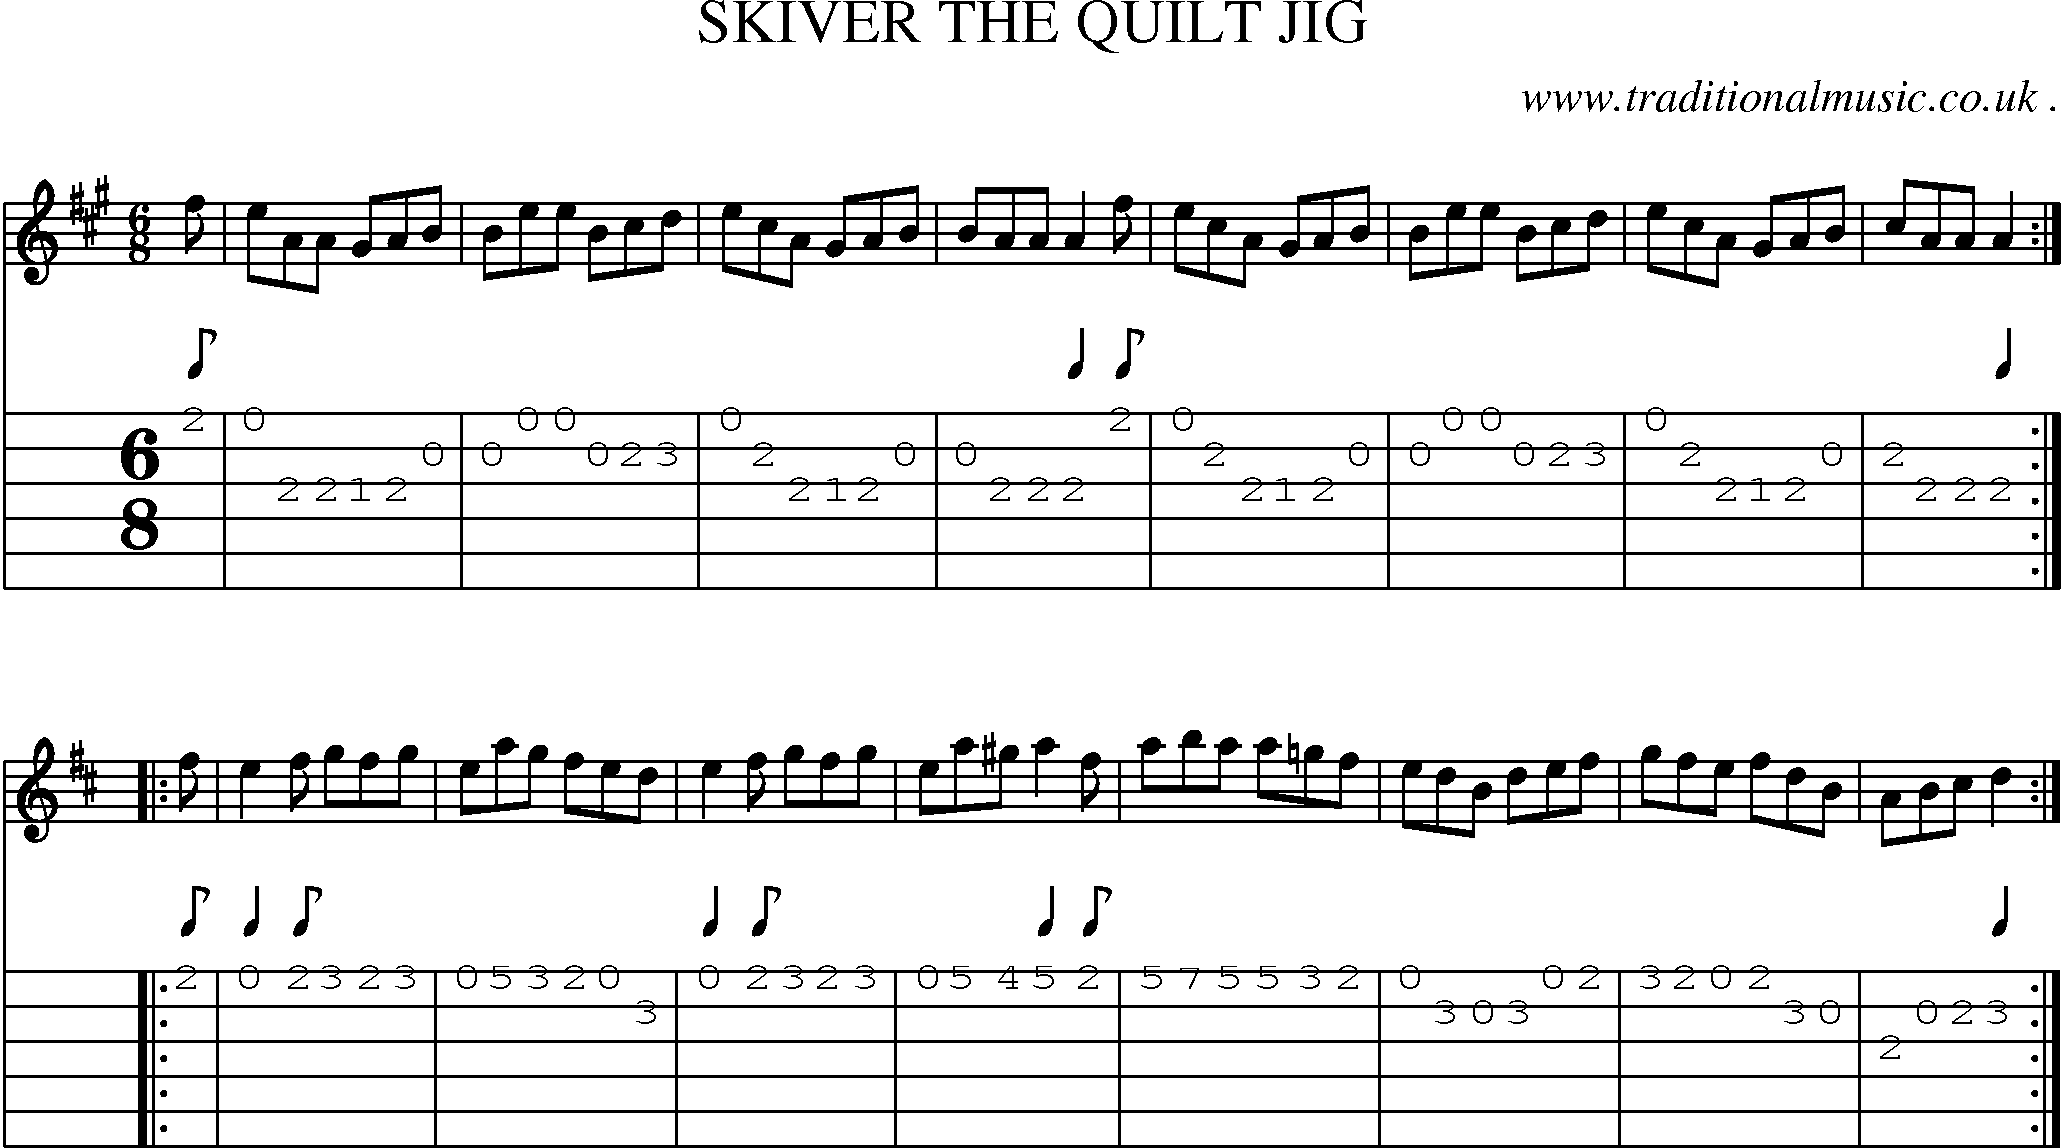 Sheet-Music and Guitar Tabs for Skiver The Quilt Jig